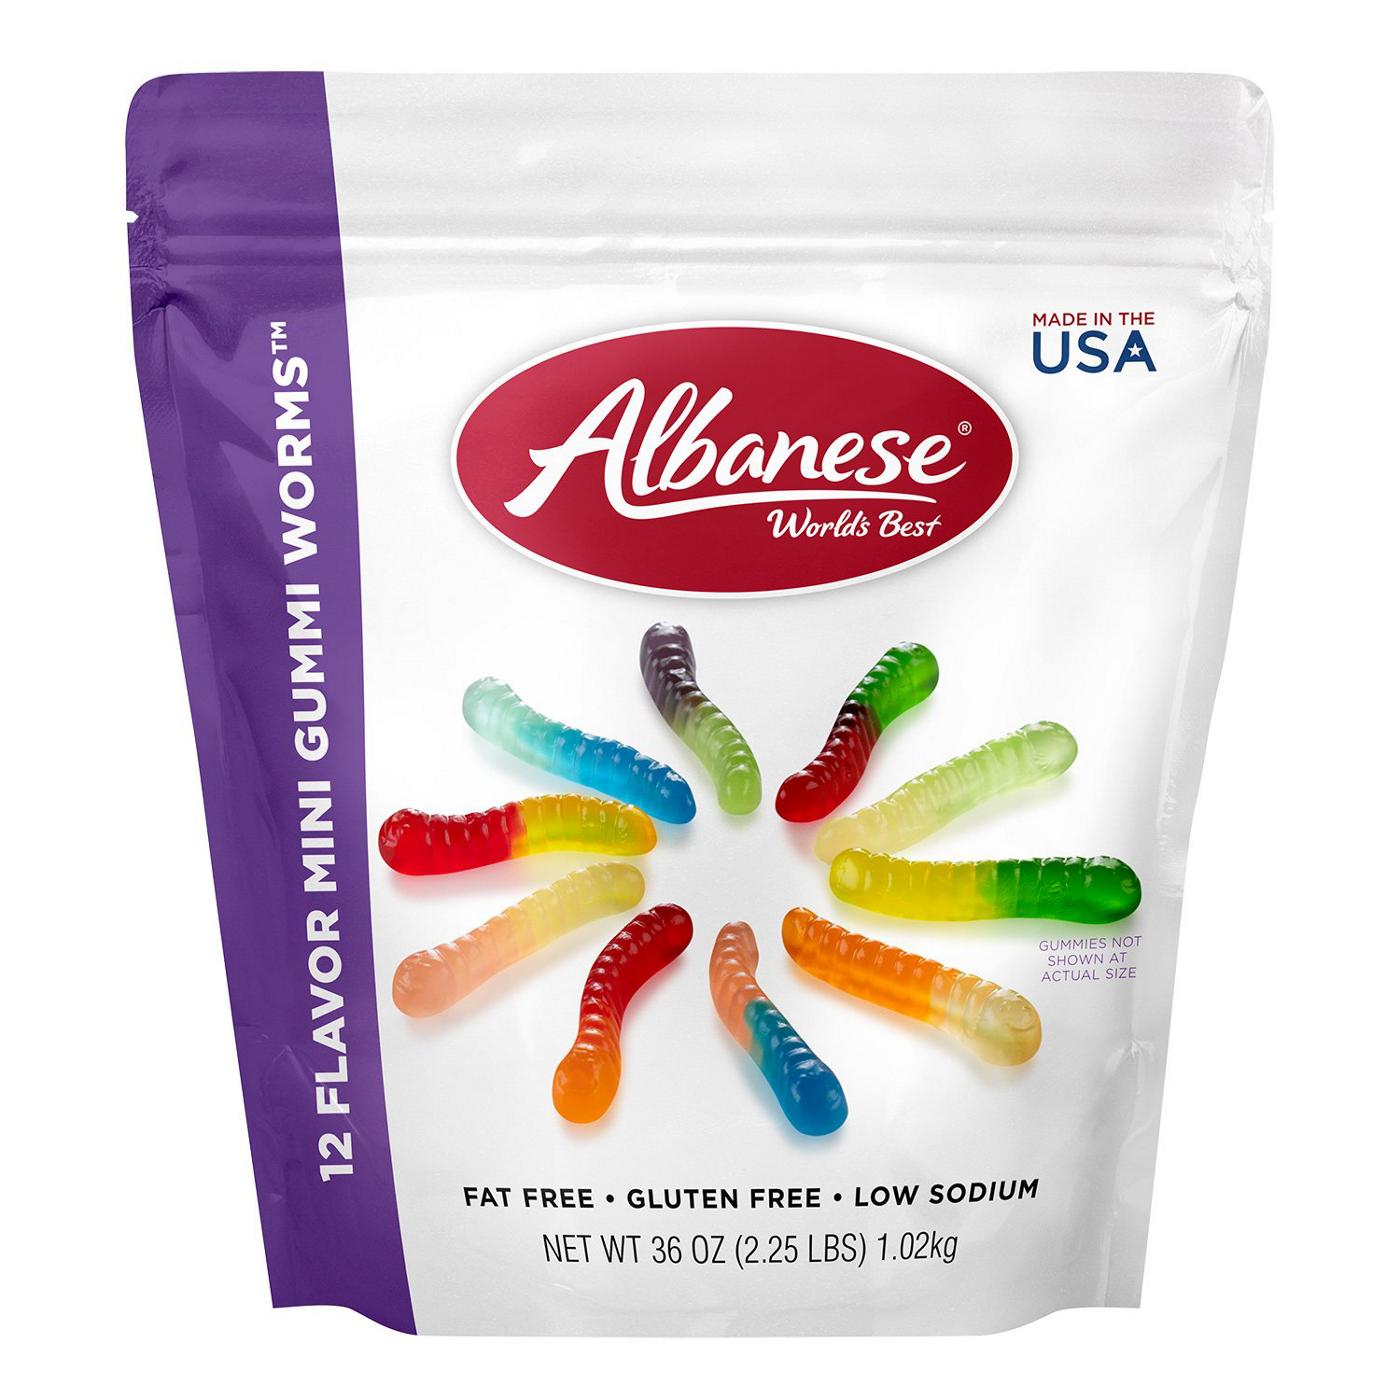 Albanese World's Best 12 Flavor Mini Worms; image 1 of 2